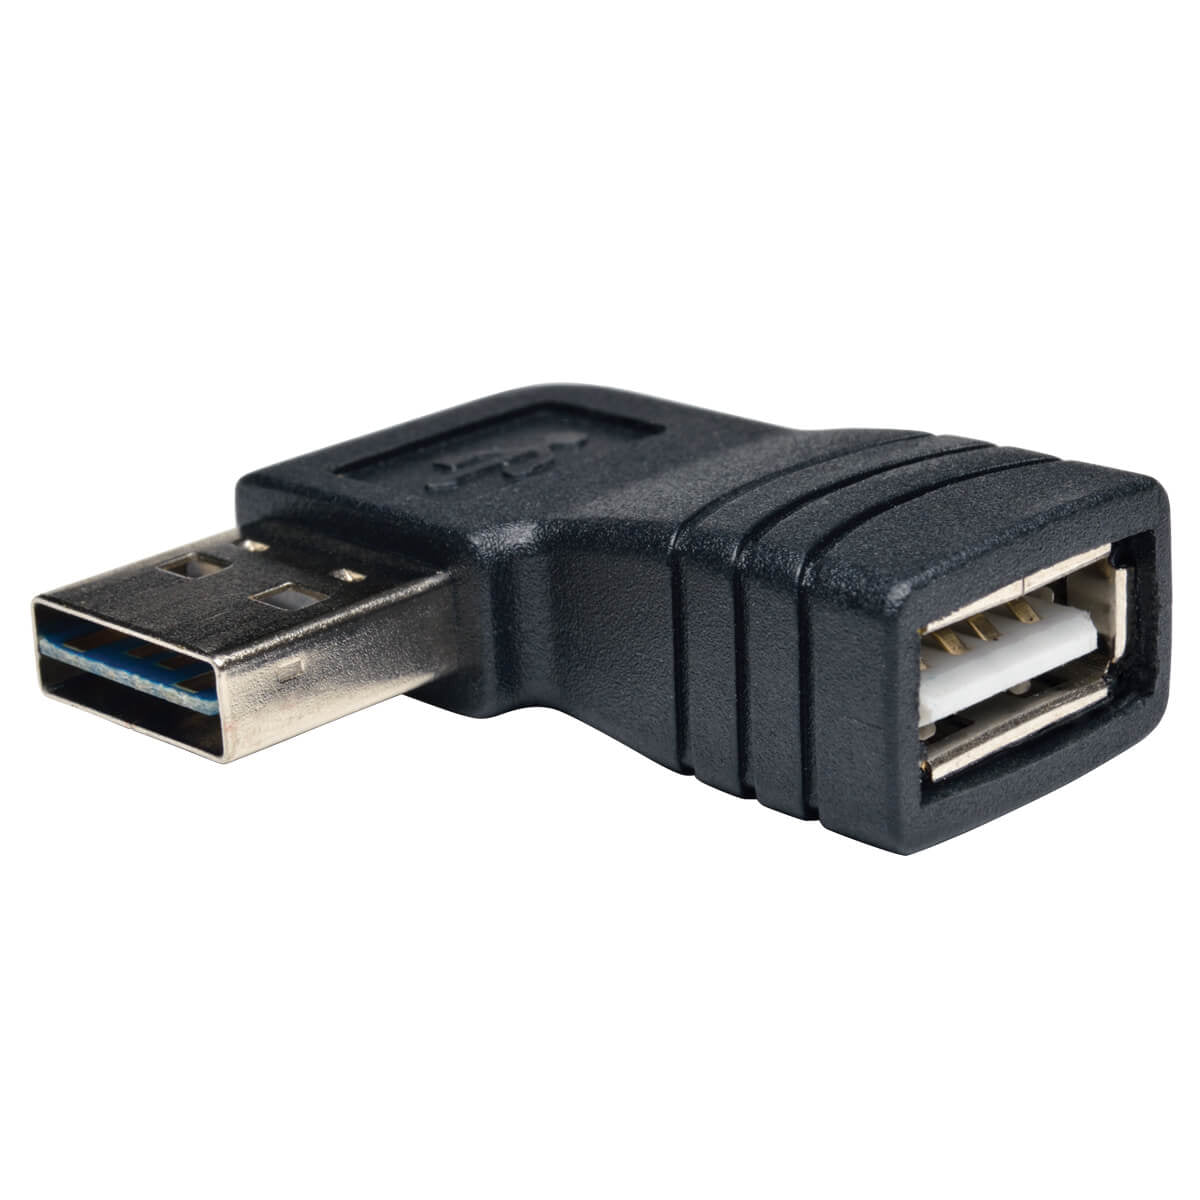 Tripp Lite Ur024-000-Ra Universal Reversible Usb 2.0 Adapter (Reversible A To Right-Angle A M/F)